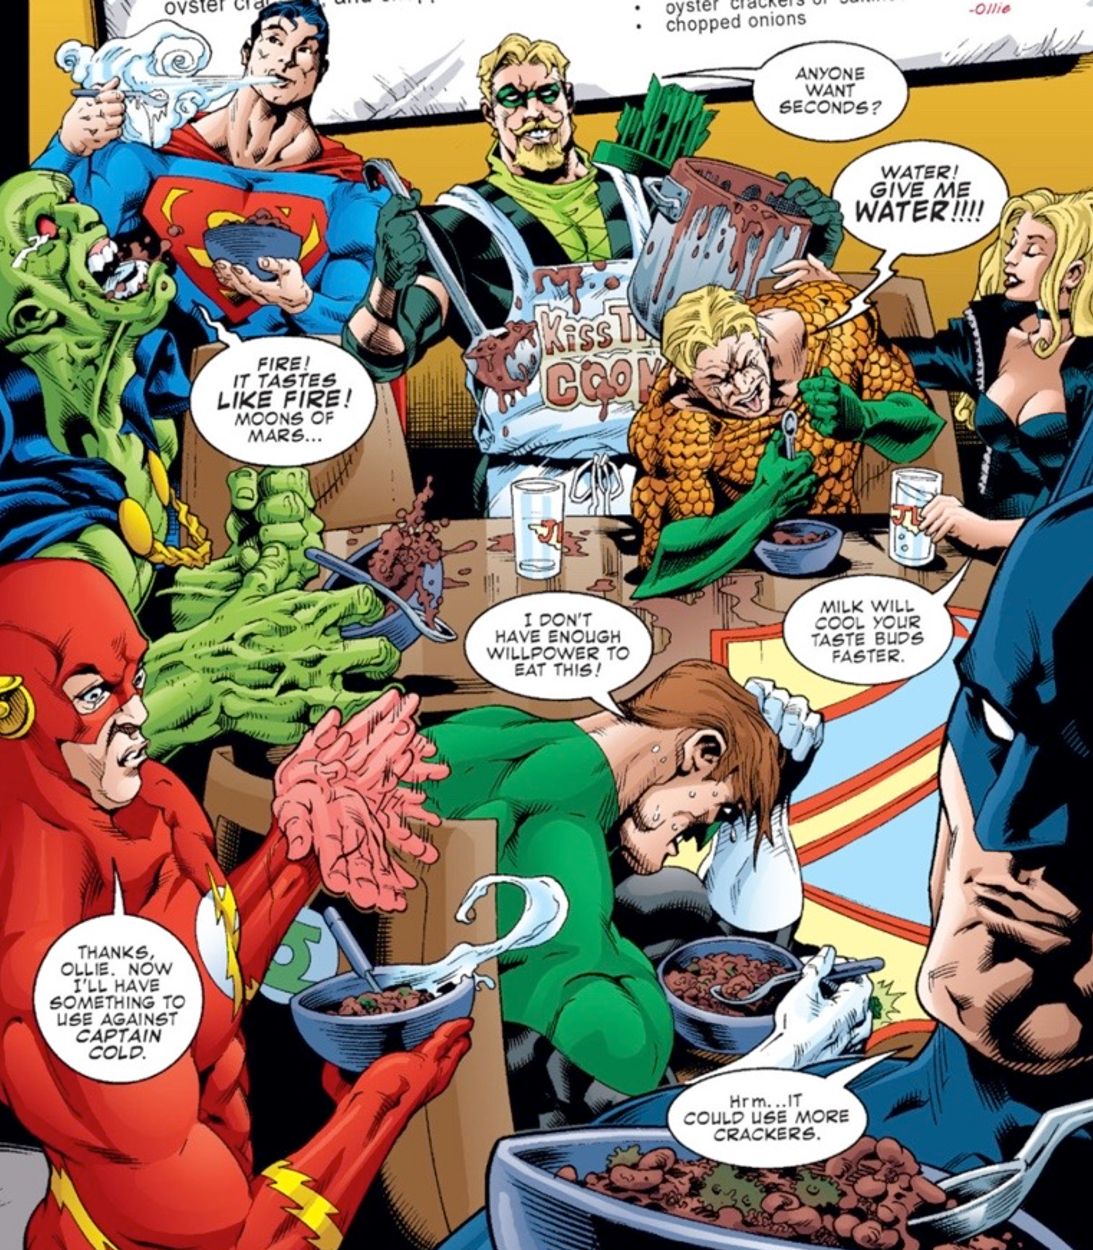 The Justice League reacts to Green Arrow's spicy chili.